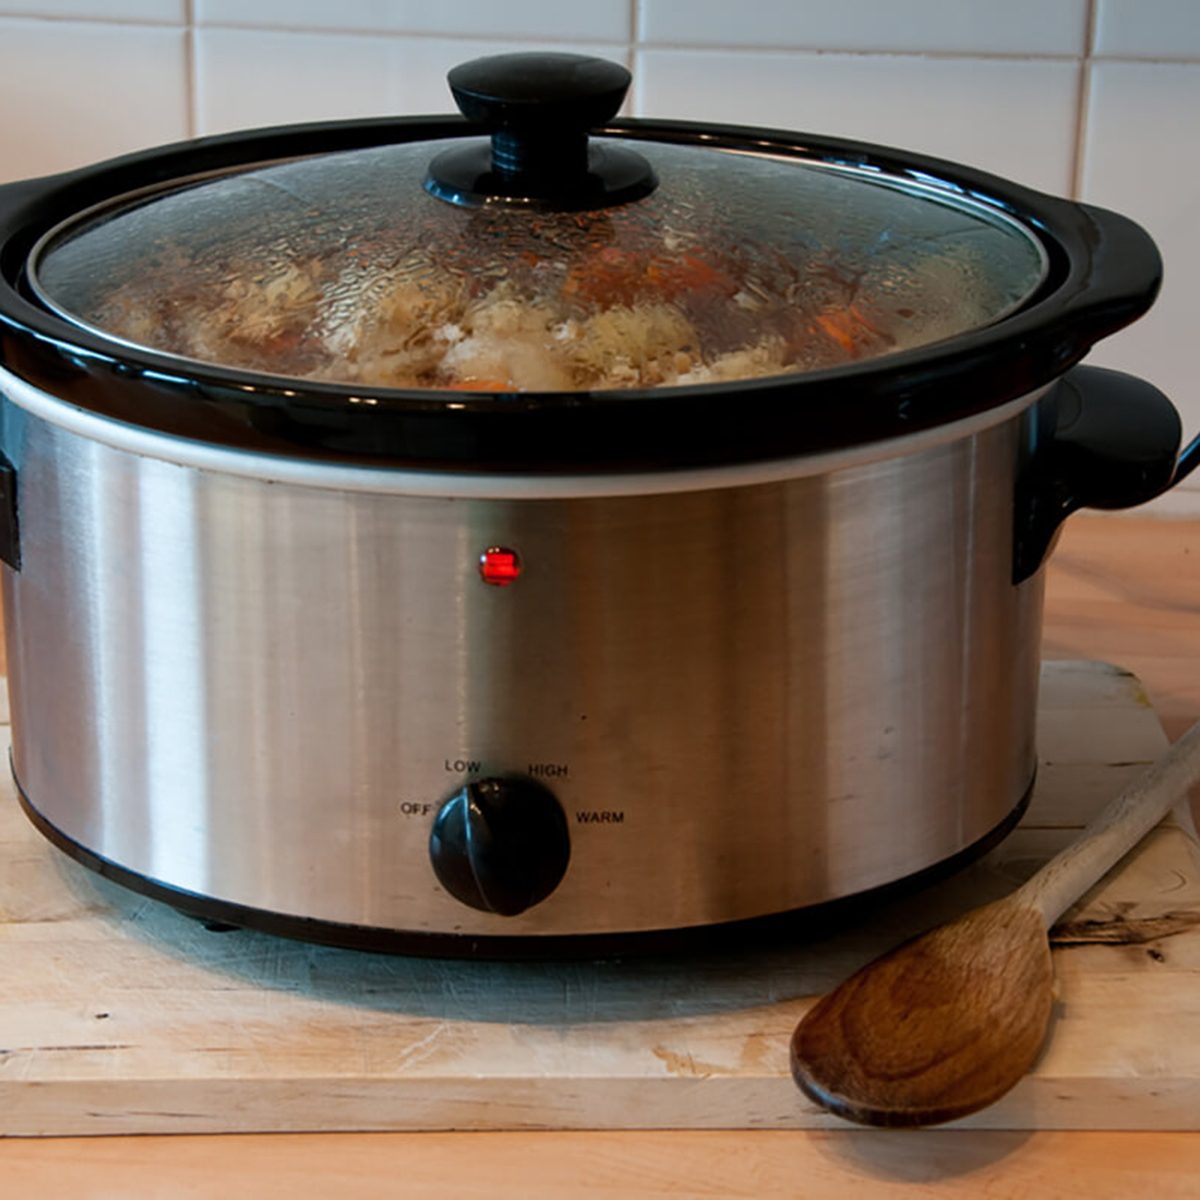 Tis the Season for Crock-Pots, But First Make Sure Yours is Safe